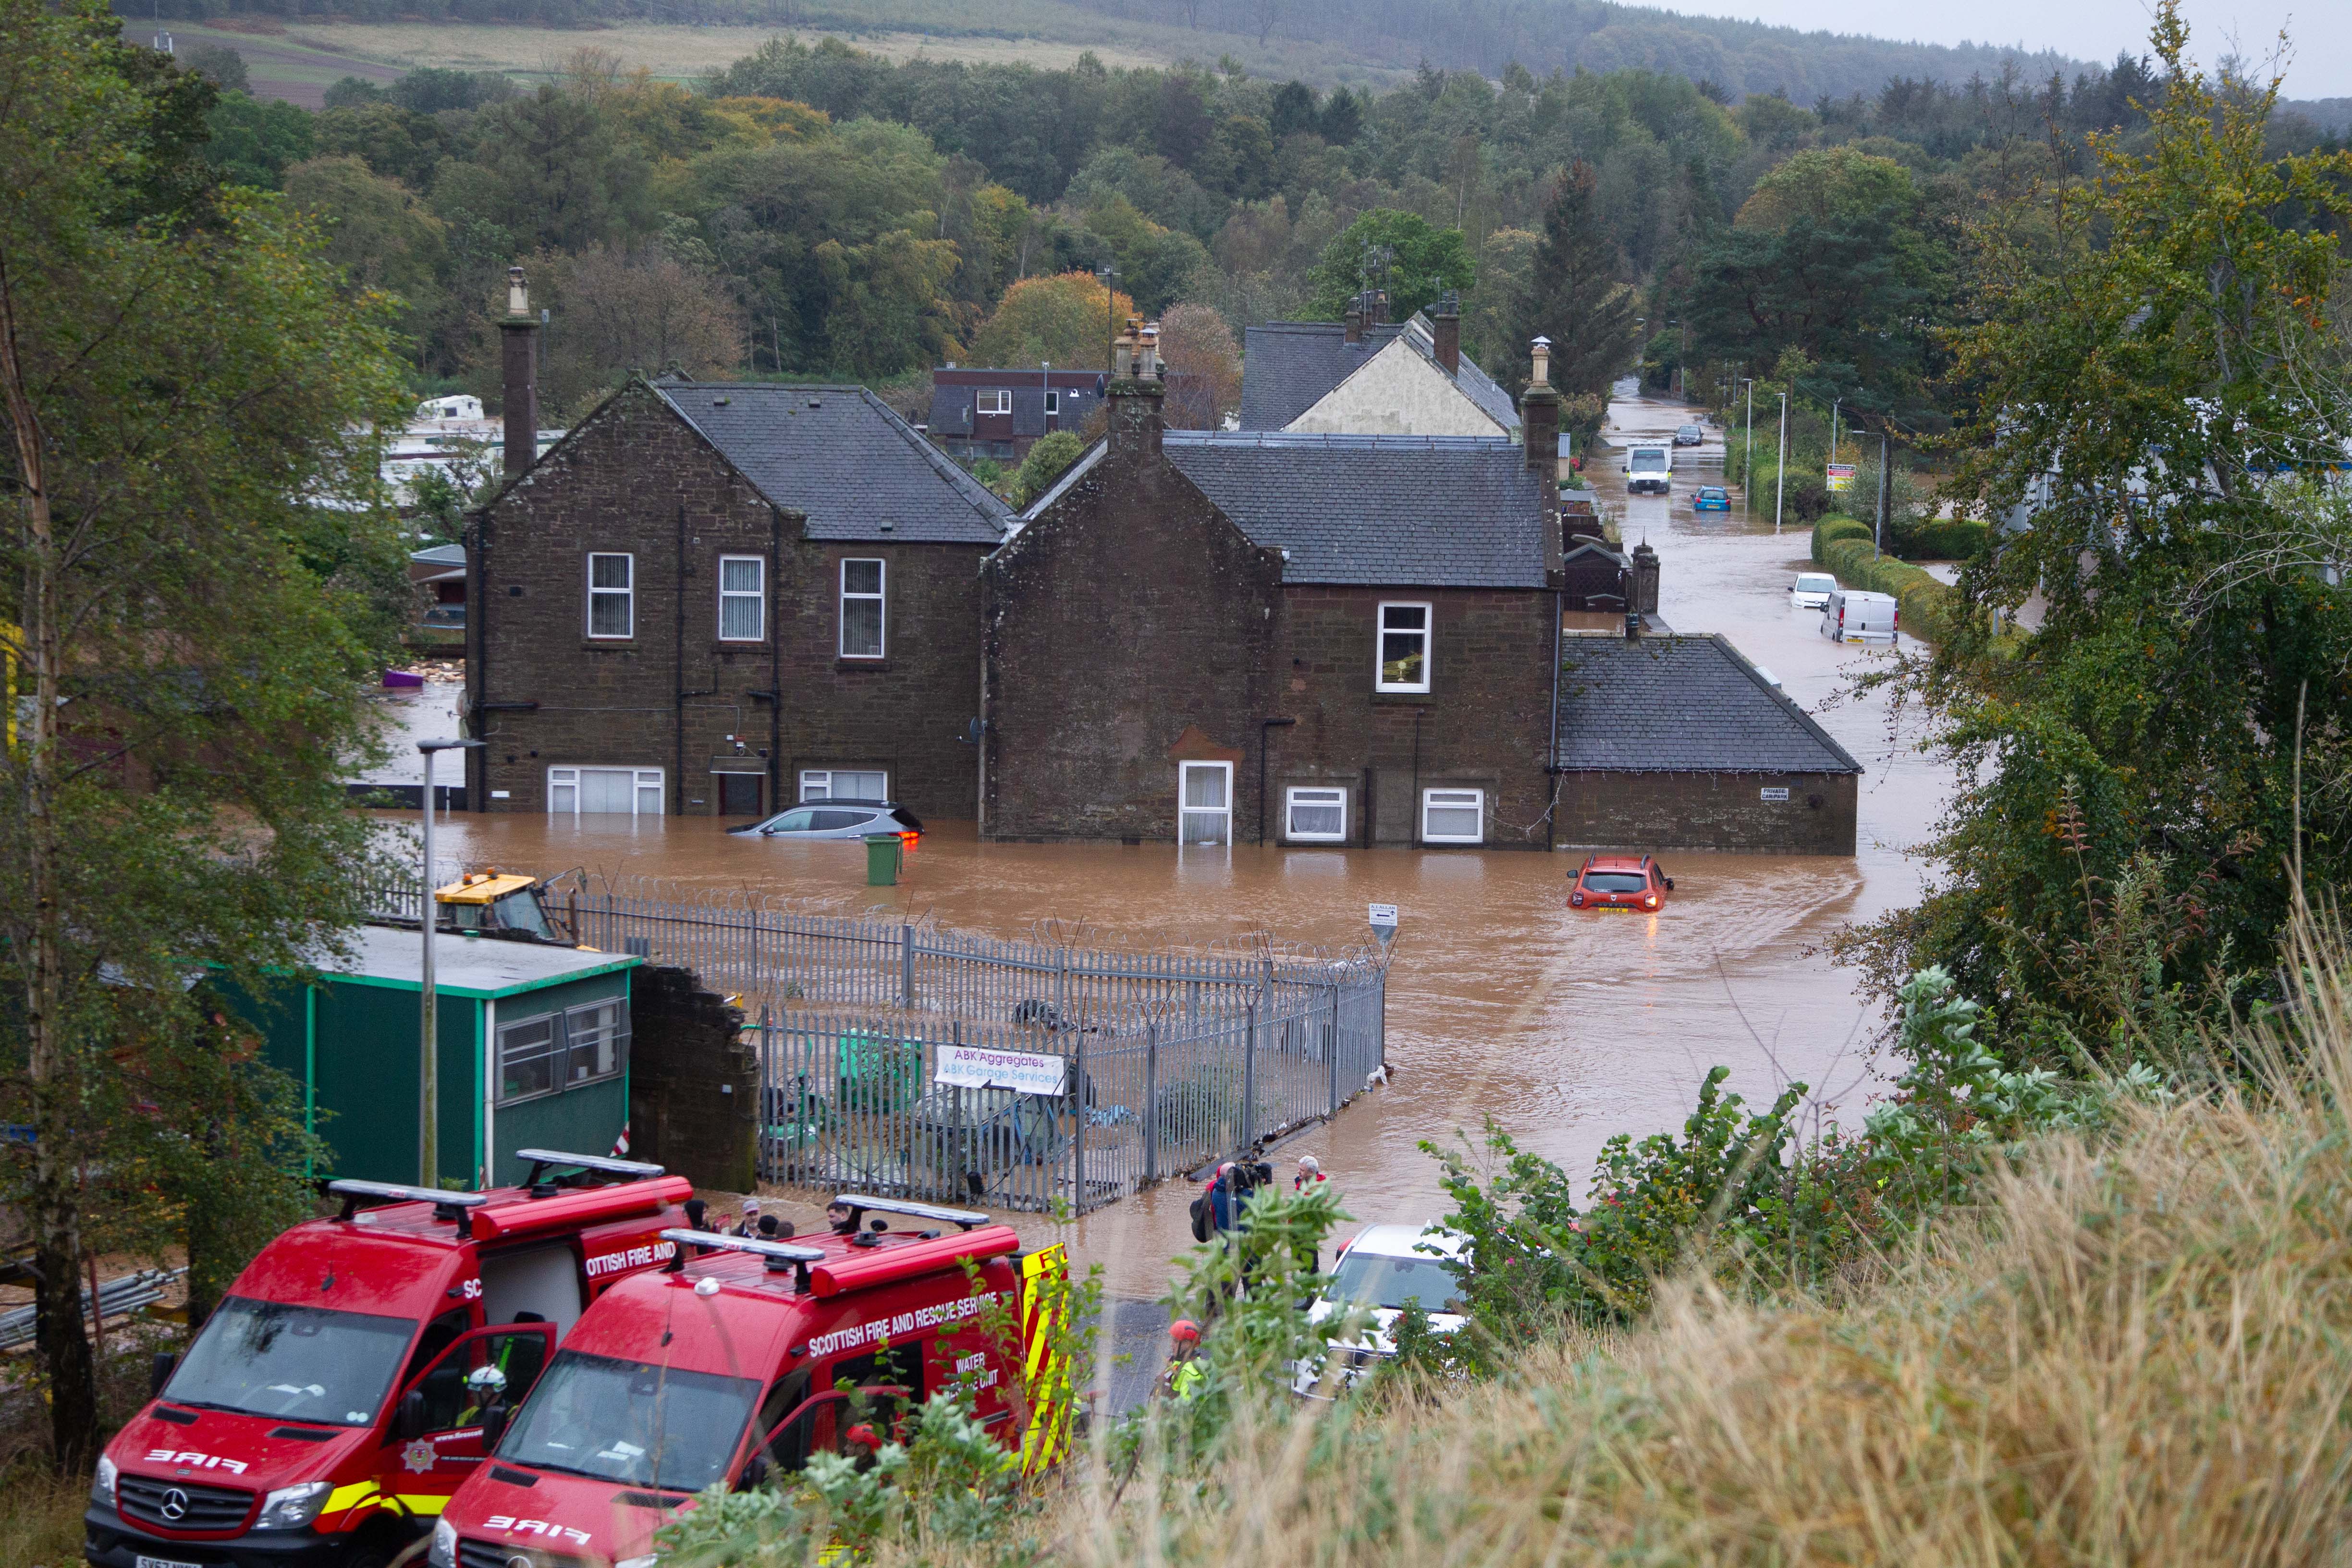 Brechin was swamped today after torrential downpours and floods